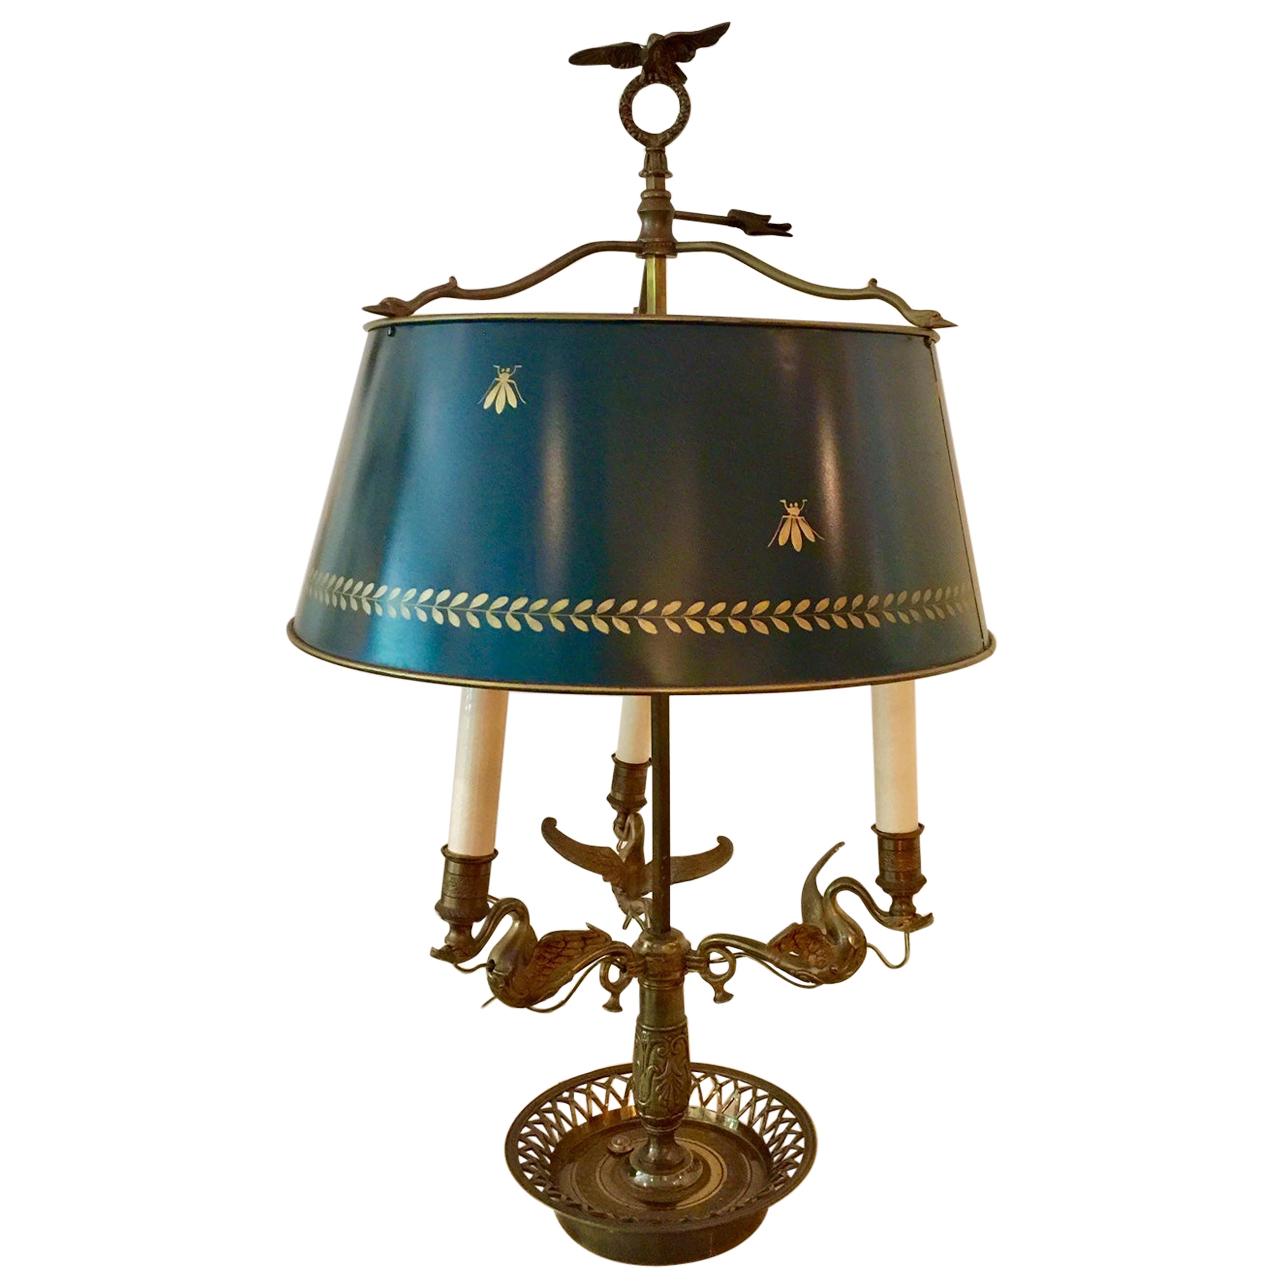 French Bouillotte Lamp, Bee and Laurel Leaf Decoration, Painted Green Tôle Shade